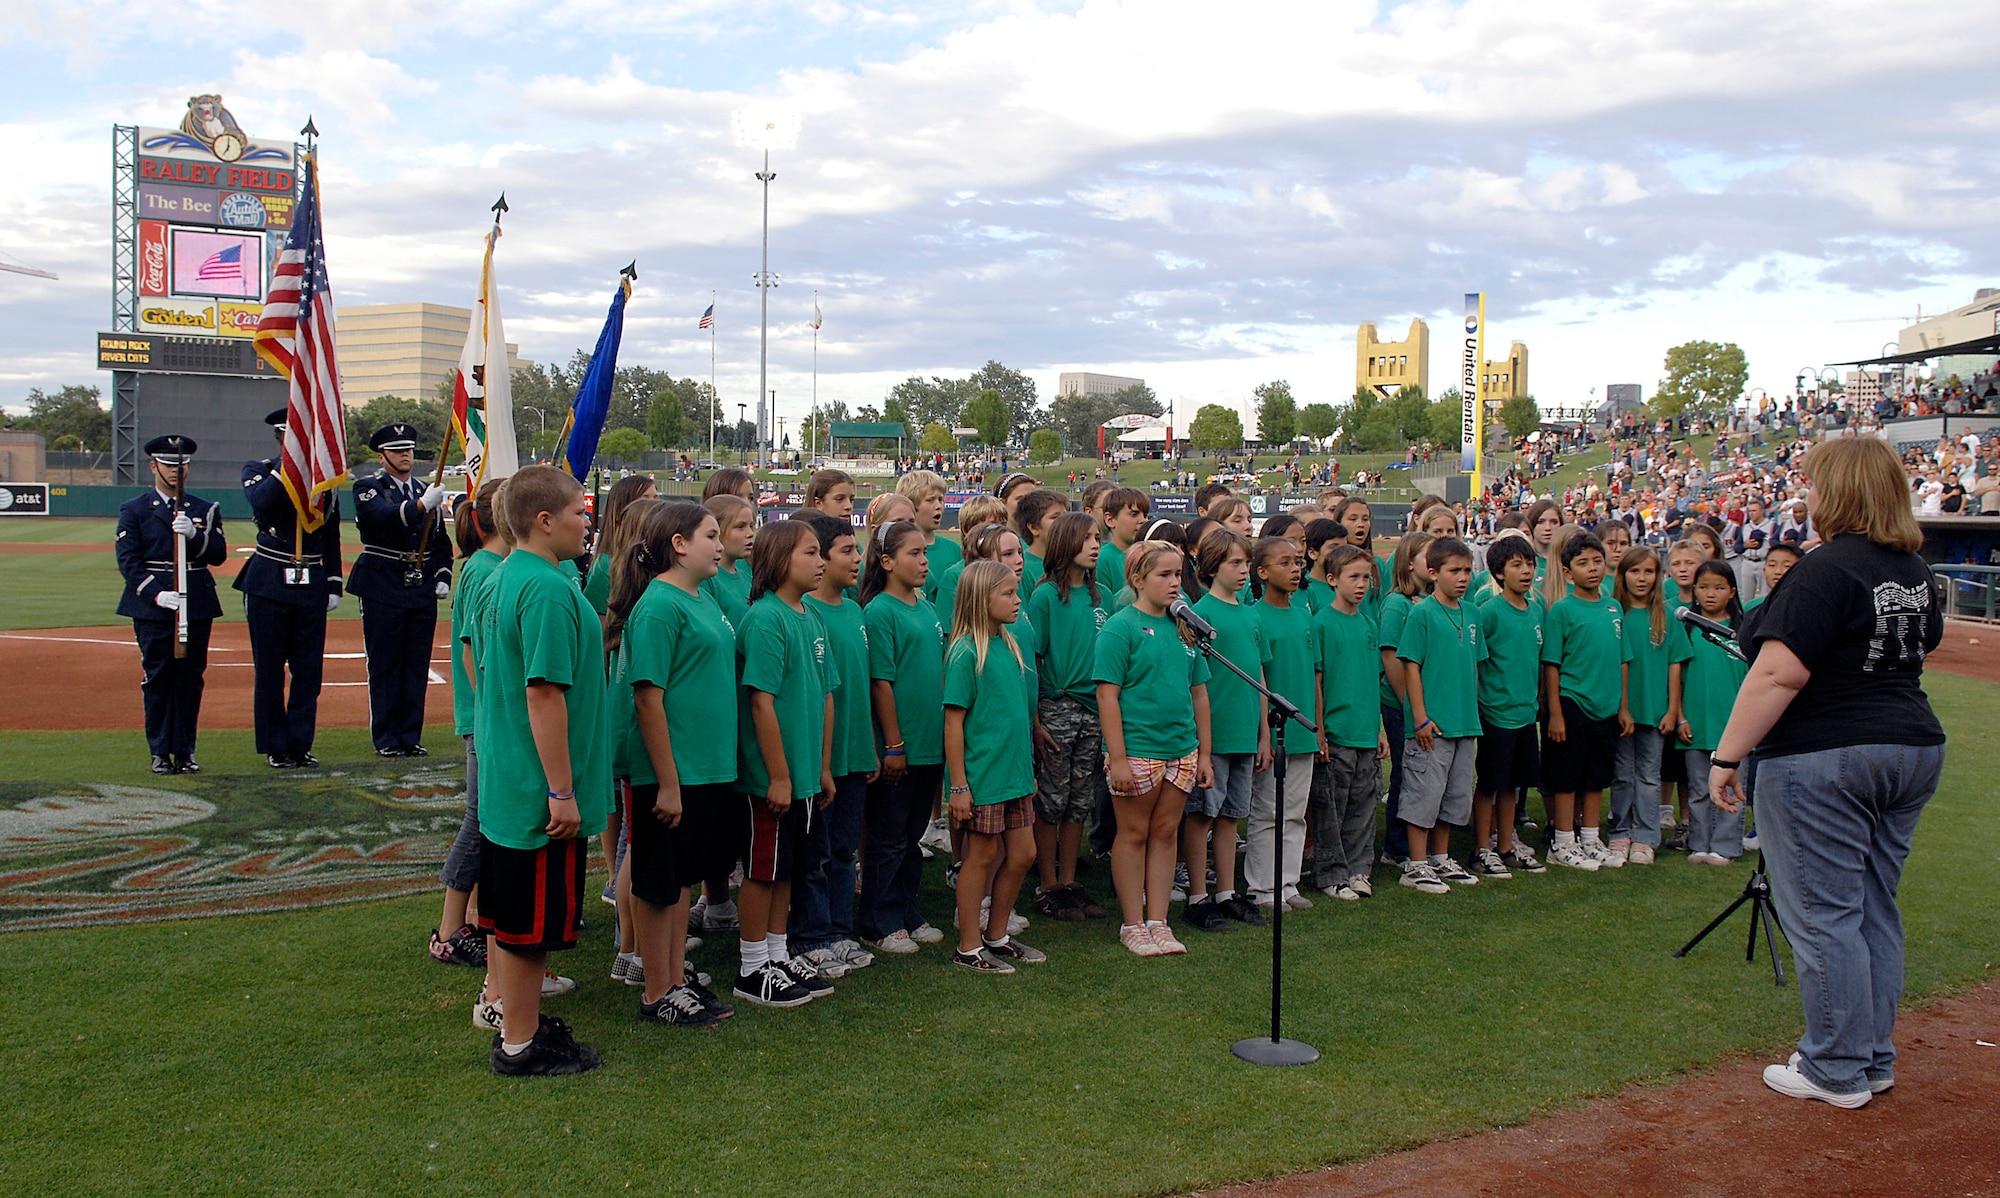 A fourth, fifth and sixth grade choir from Northridge Elementary School sings the national anthem before a local minor league baseball game June 4 during Air Force Week in California. The purpose of Air Force Week is to inform and educate the American public about the importance and roles of the Air Force in America's national defense. (U.S. Air Force photo/Tech. Sgt. Larry A. Simmons)
